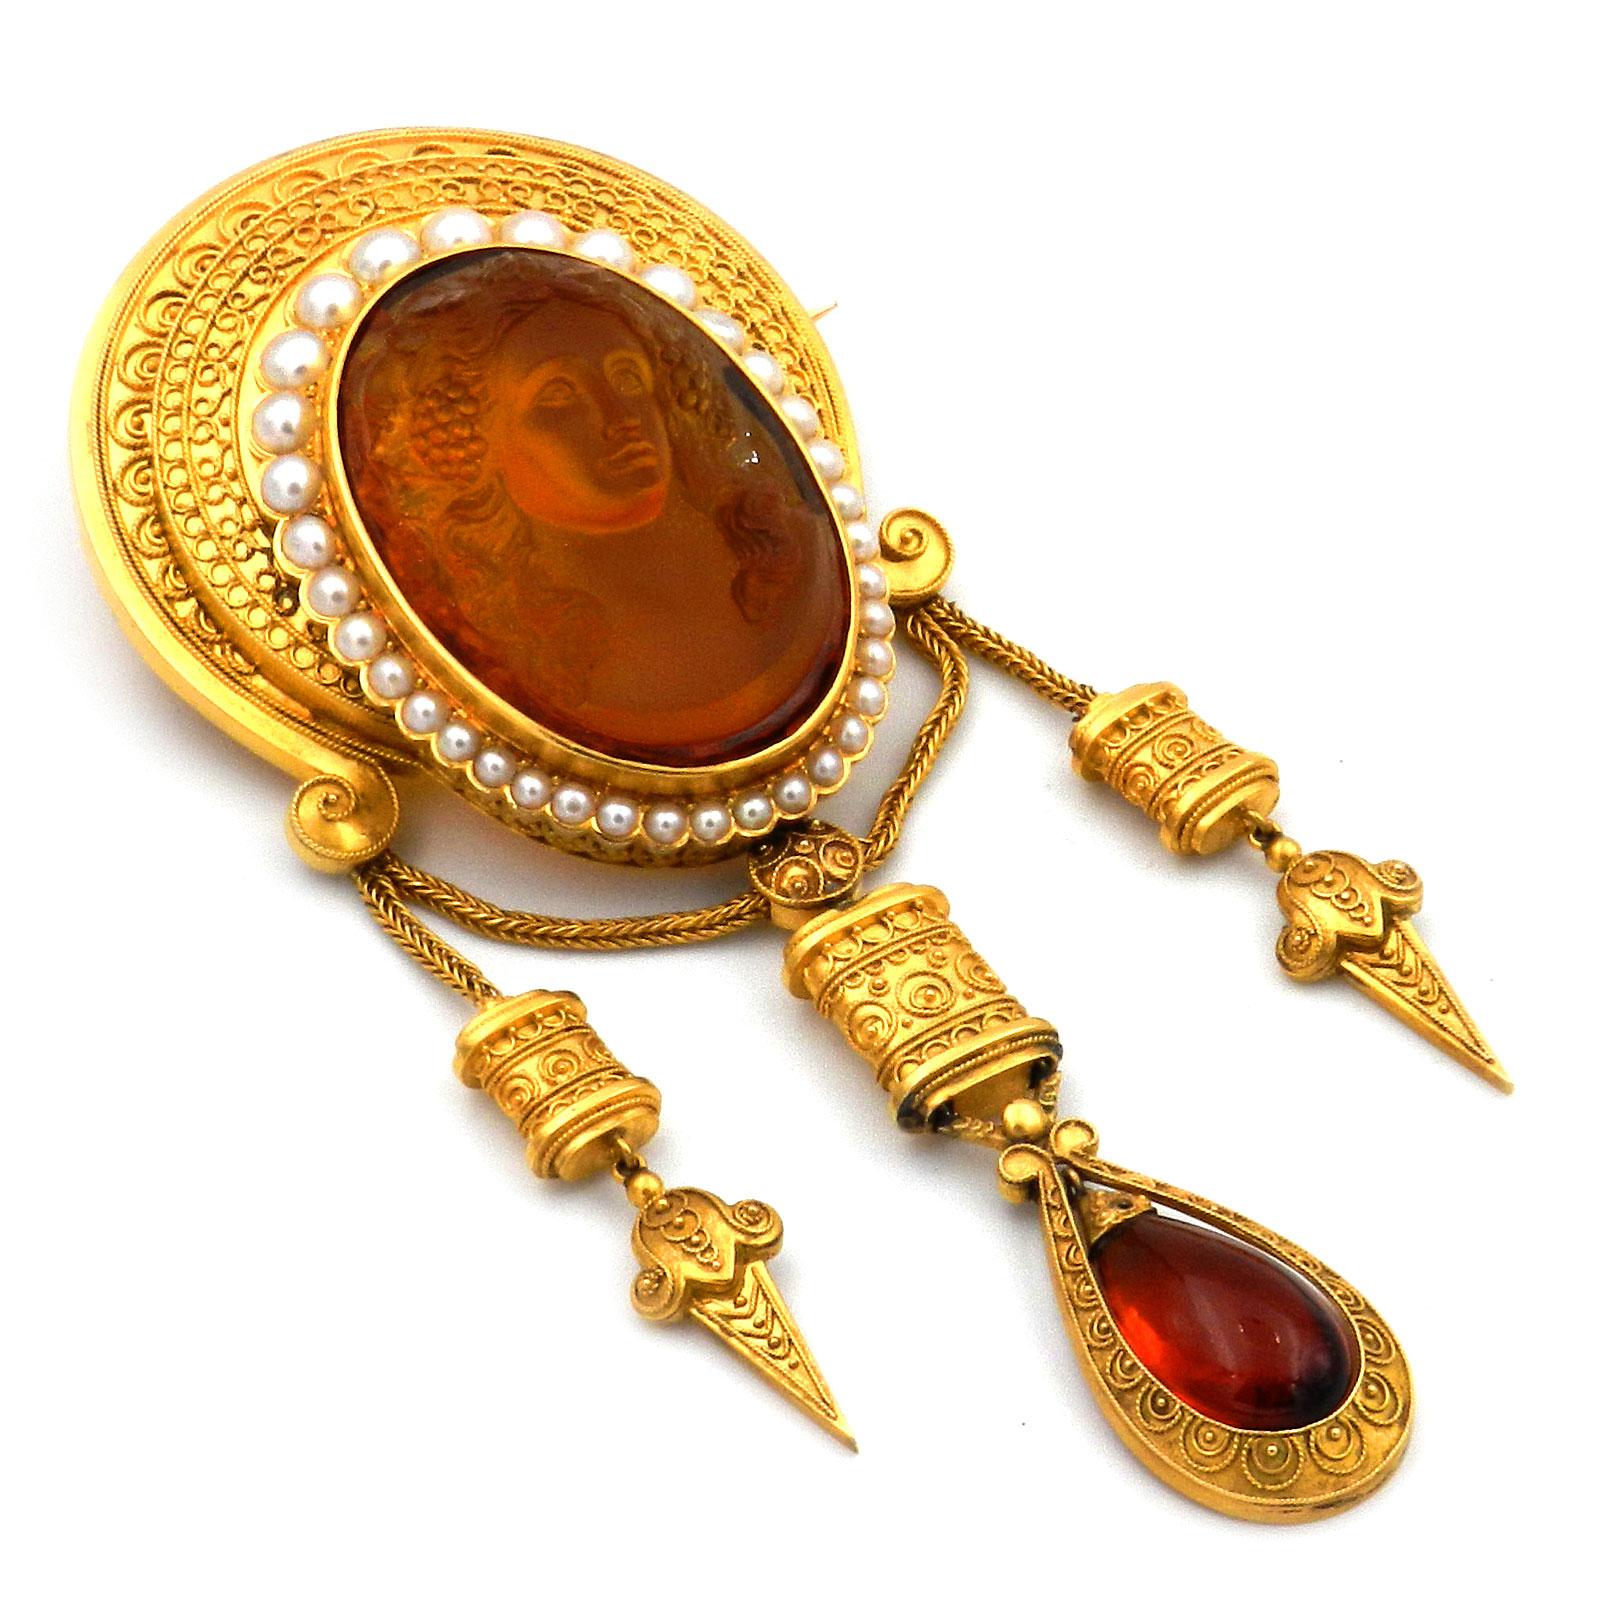 Etruscan Revival Citrine Cameo and Pearl Gold Brooch, France circa 1870

Important brooch in the archaeological style, set with a golden yellow, detailed cut citrine cameo depicting the goddess Flora and framed by a row of oriental pearls, mounted